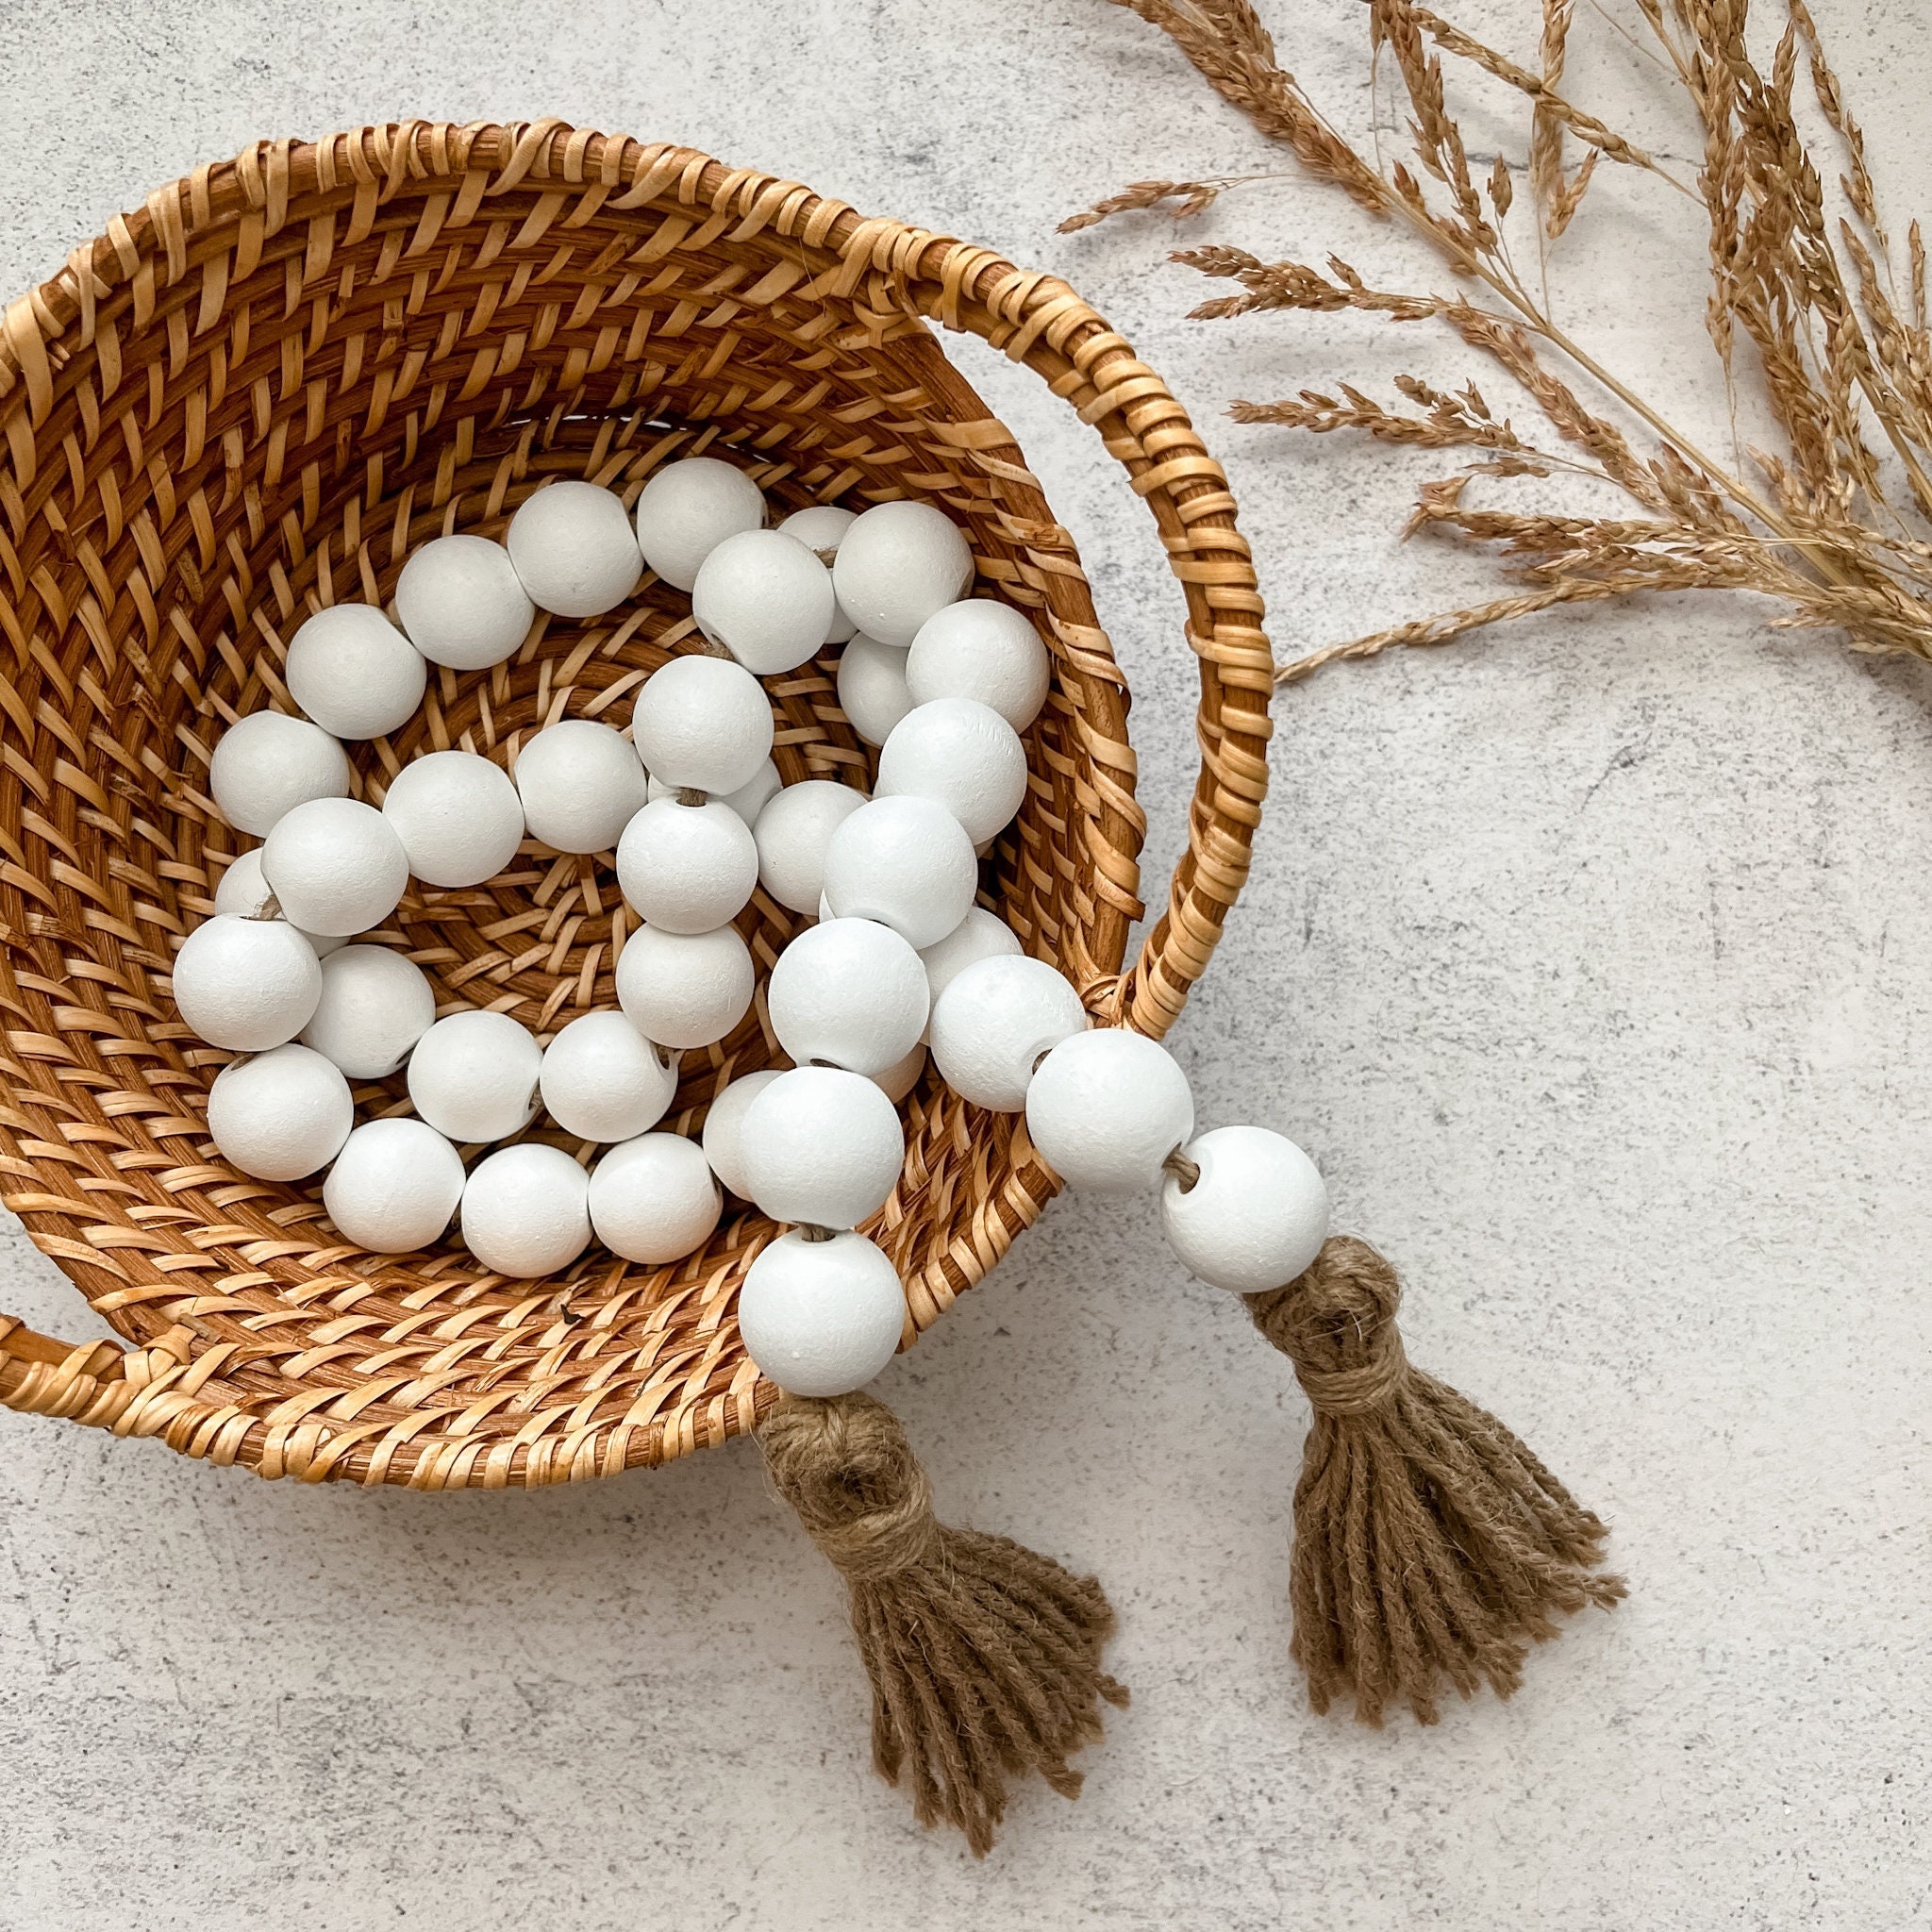 Whitewashed Wood Bead Garland by Factory Direct Craft - White Washed Wooden  Bead Garland for Christmas Tree Decoration - for Rustic, Natural